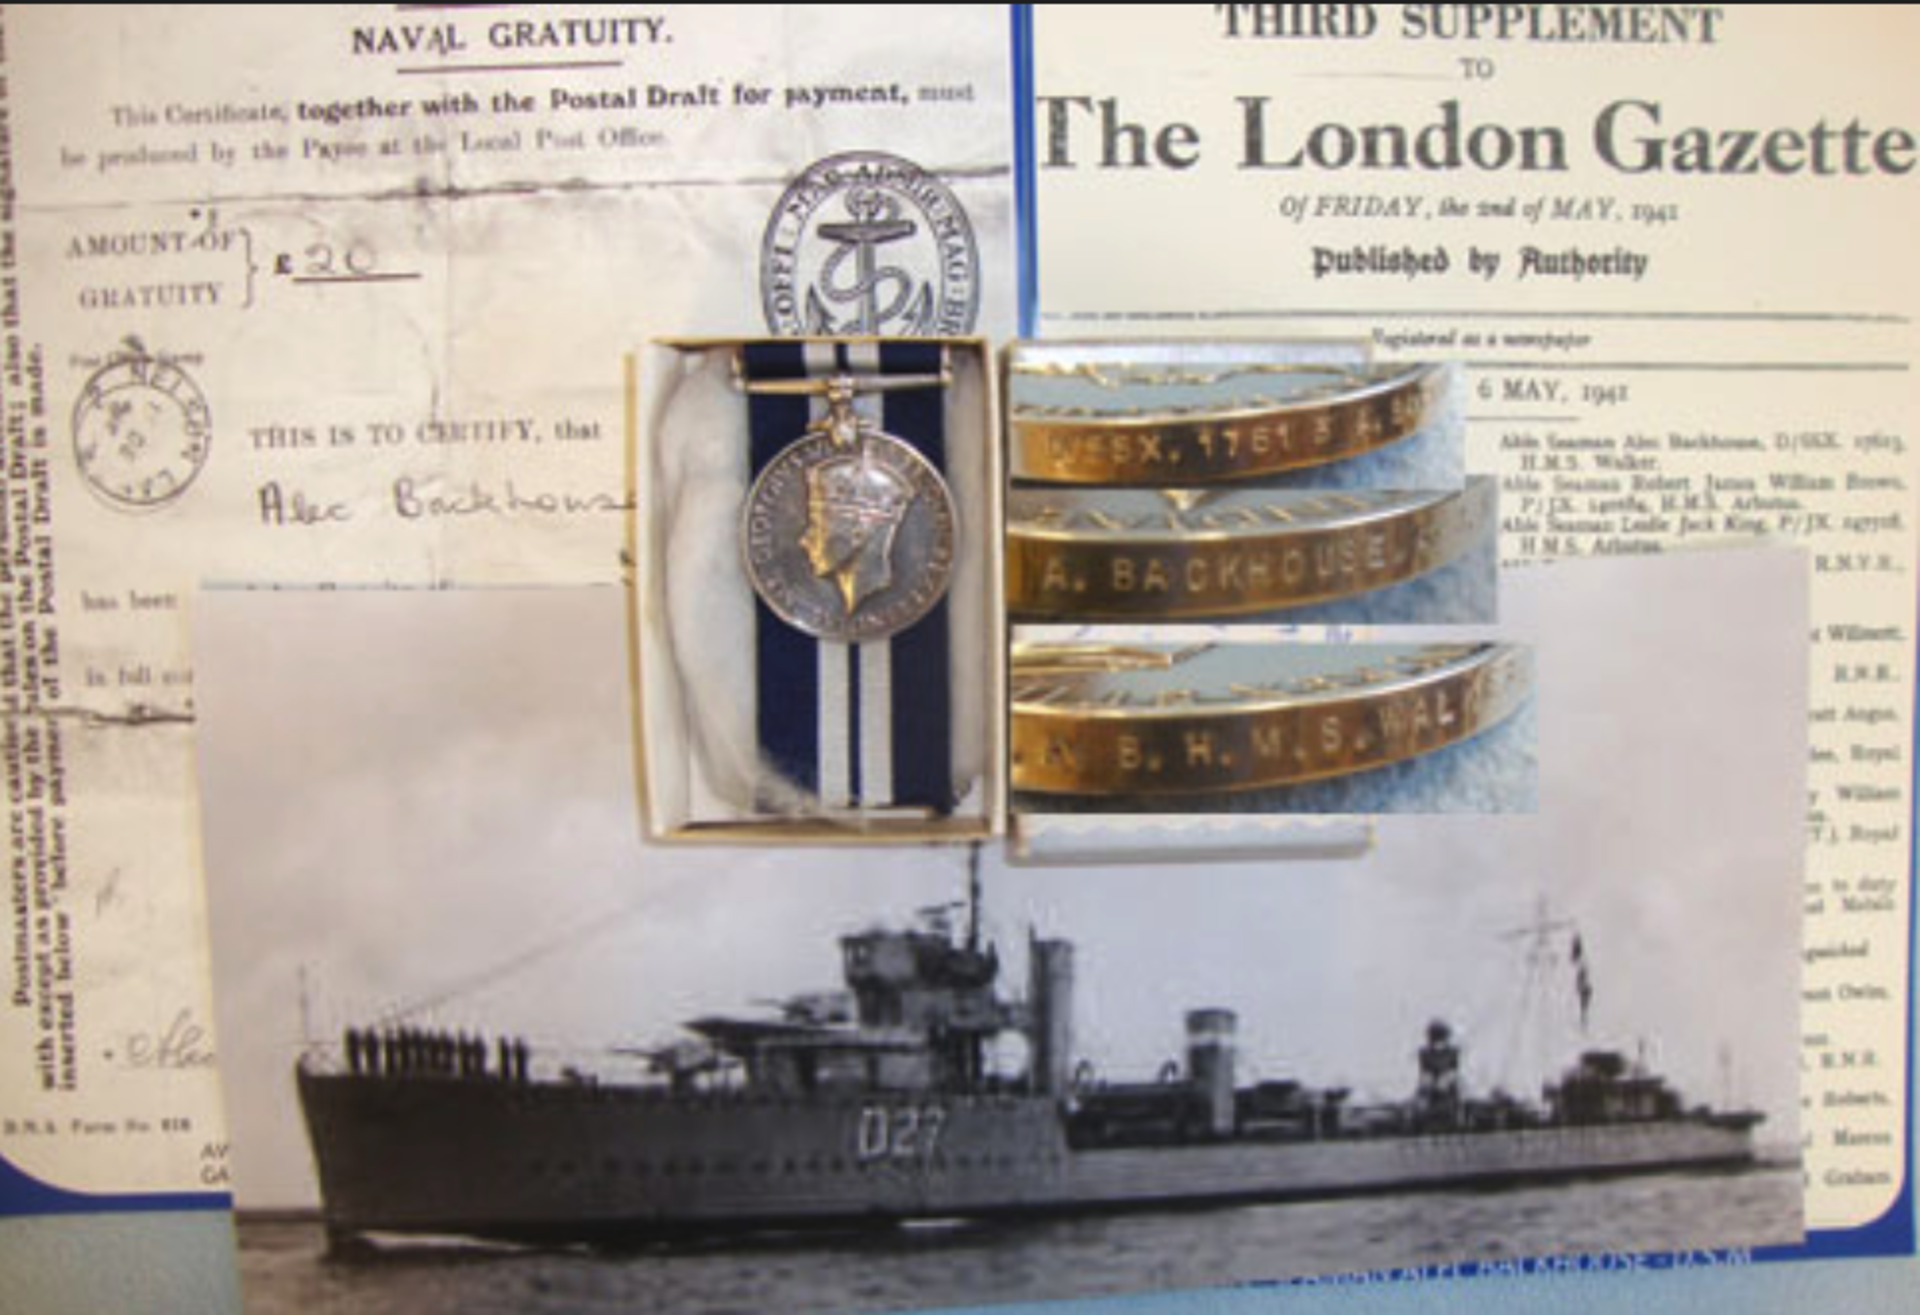 MINT, WW2 BRITISH NAVY BATTLE OF THE ATLANTIC HERO DSM 4 Medal Group To Able Seaman D/SSX 17613 - Image 2 of 3